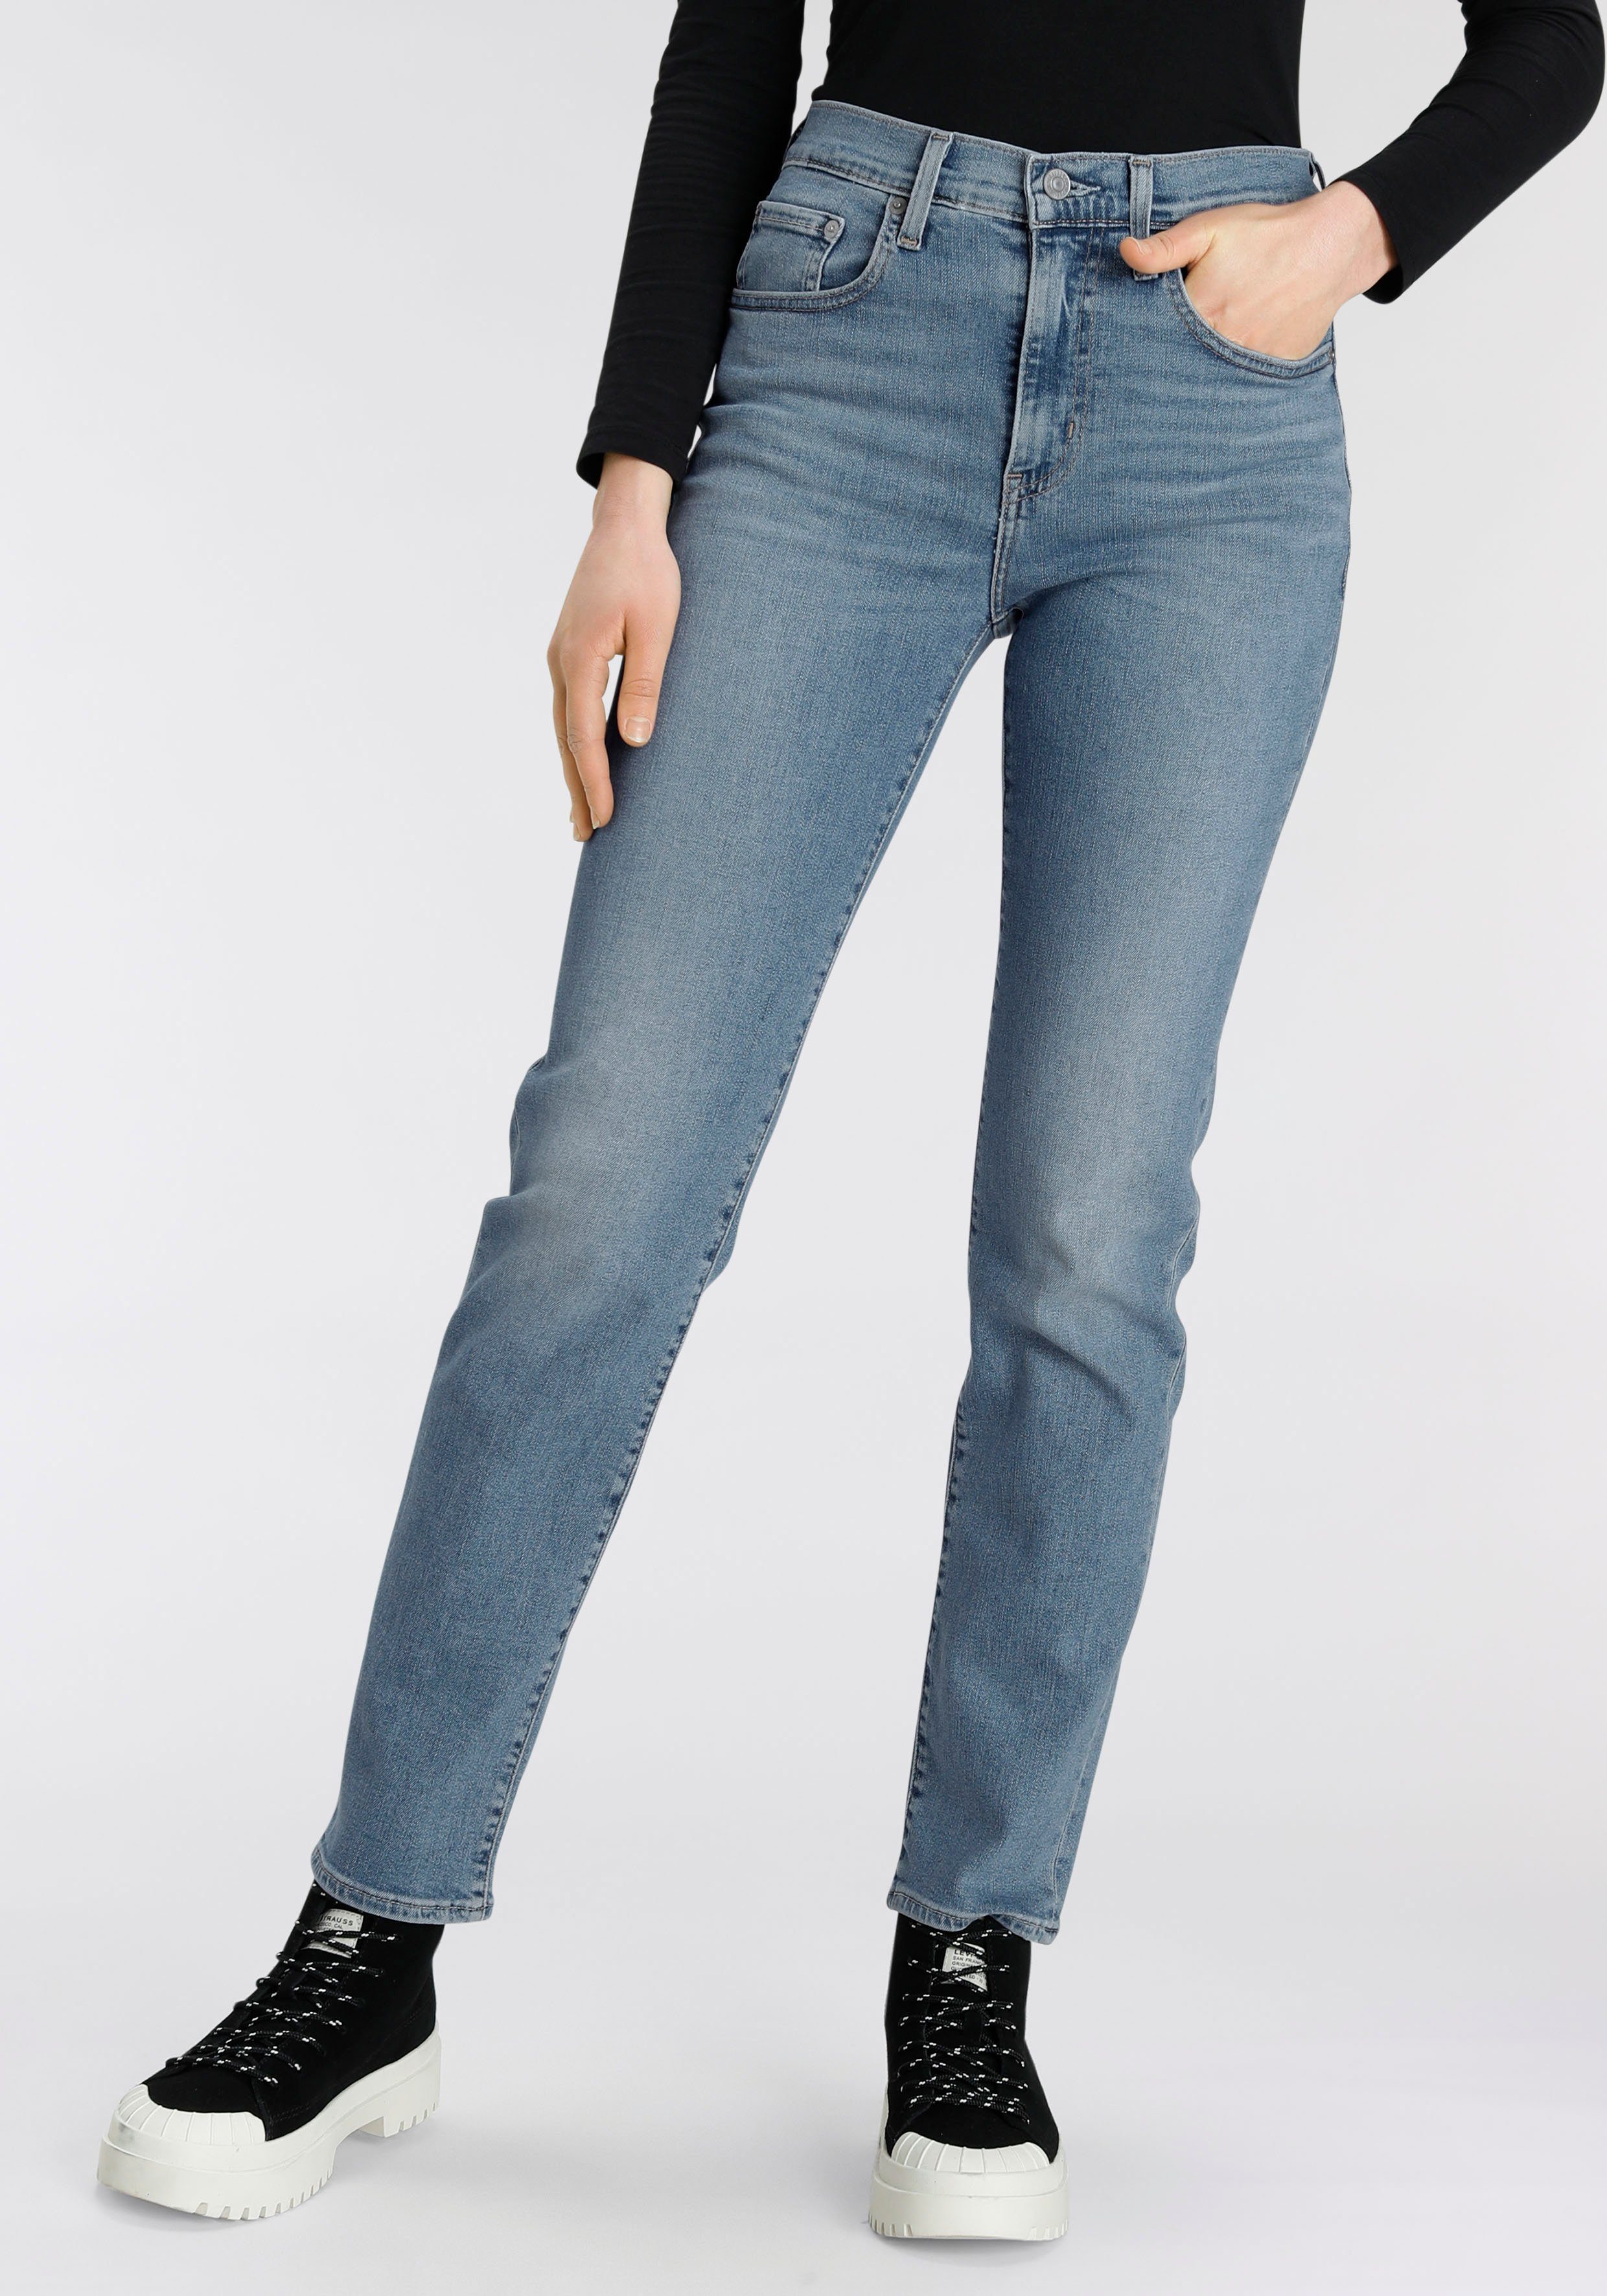 Straight-Jeans Rise denim blue-used 724 Levi's® Straight High